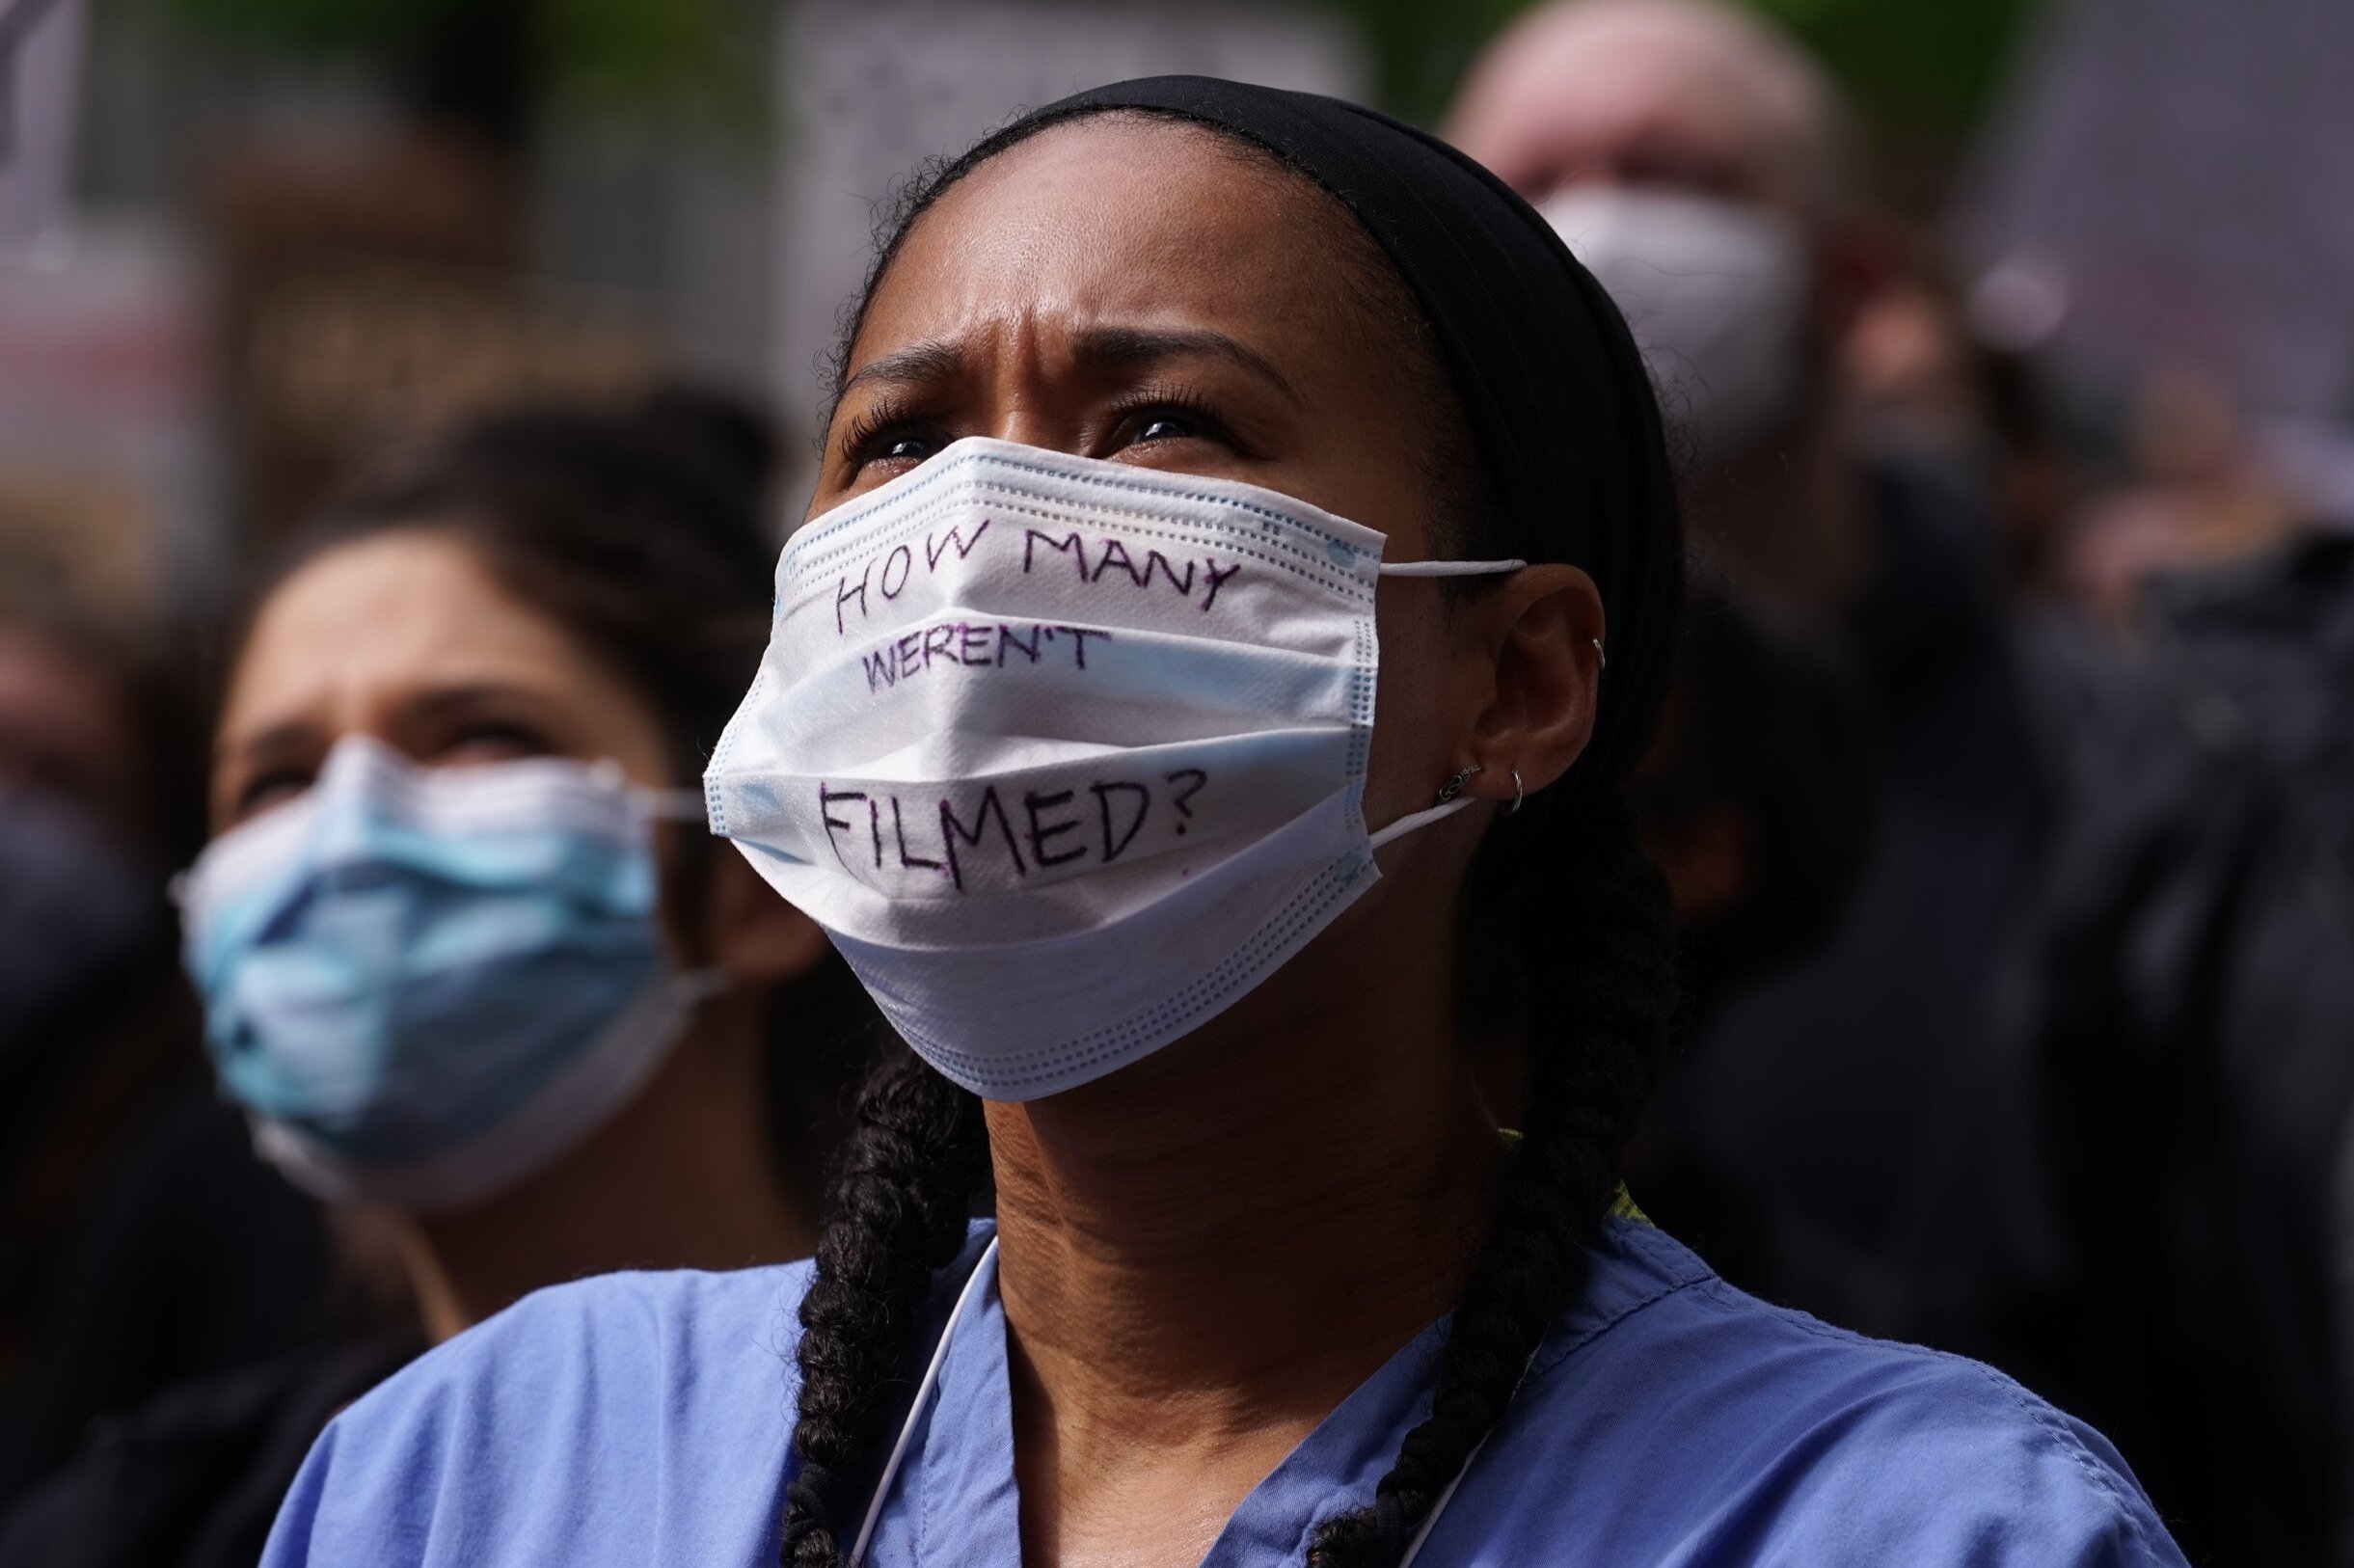   A healthcare worker looks on as speakers address a large crowd outside Seattle’s city hall. Thousands of medical professionals, students and civilians gather in solidarity with the Black Lives Matter movement. 